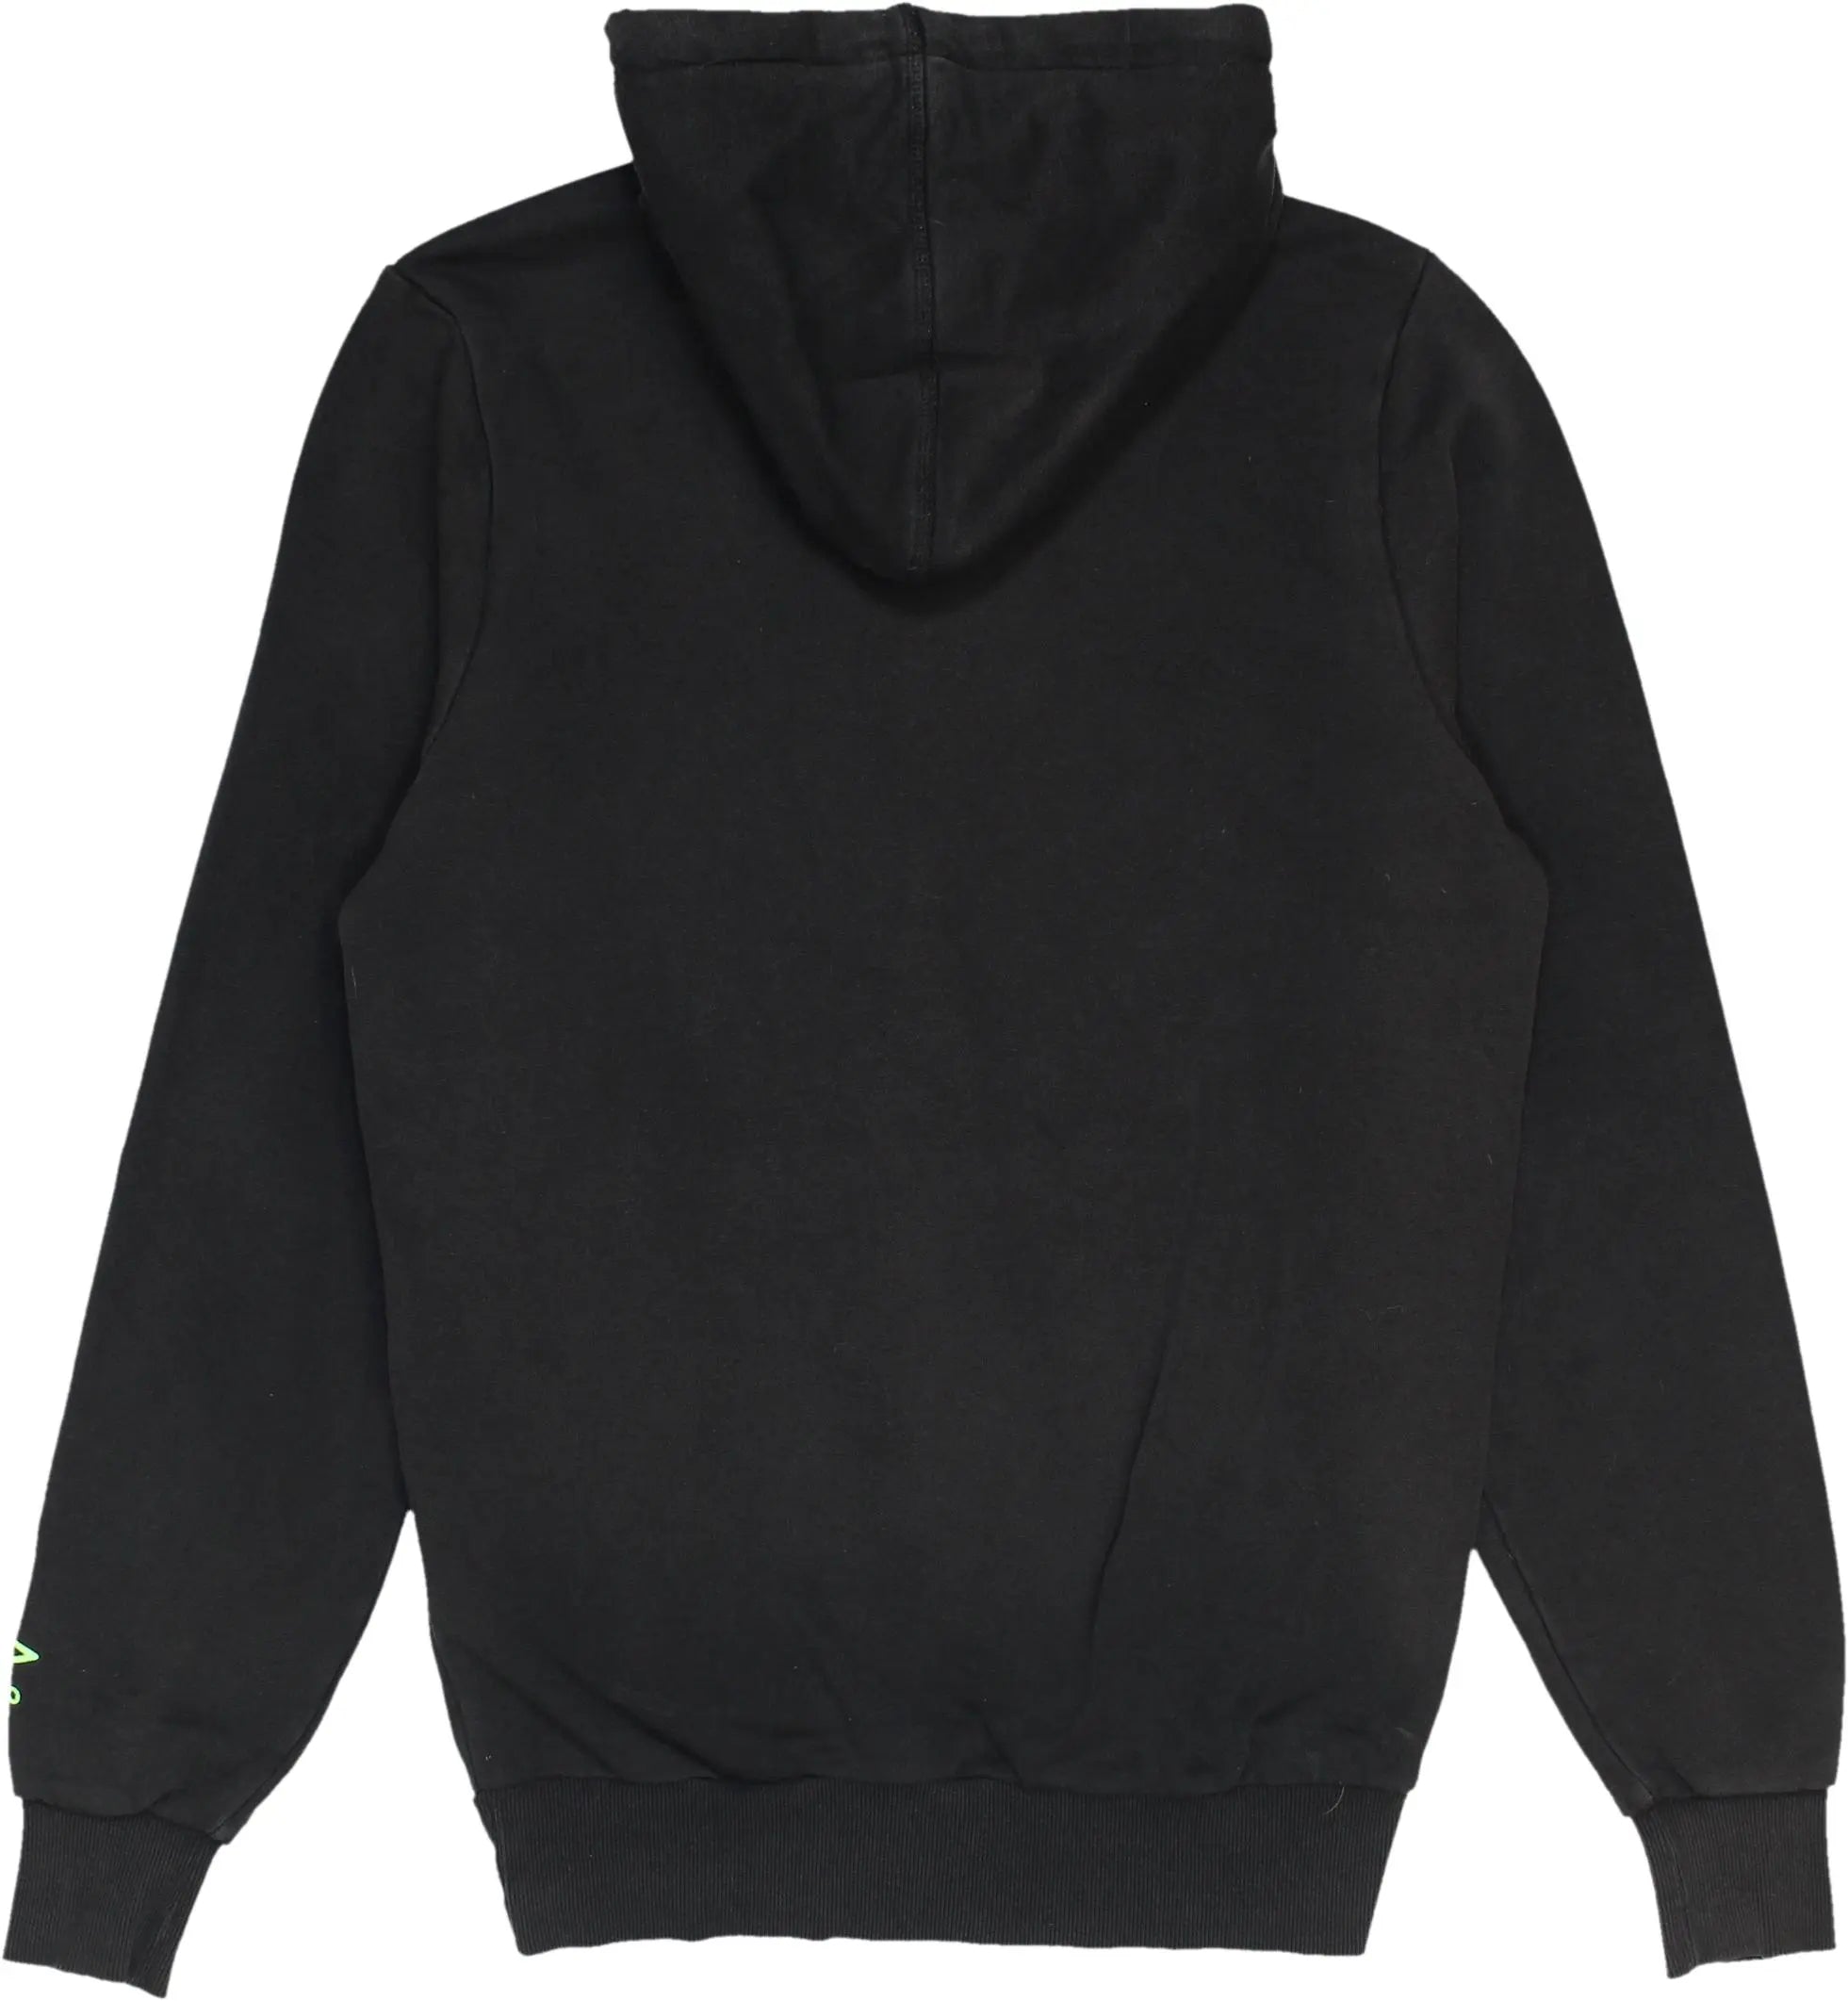 Umbro - Black Hoodie by Umbro- ThriftTale.com - Vintage and second handclothing